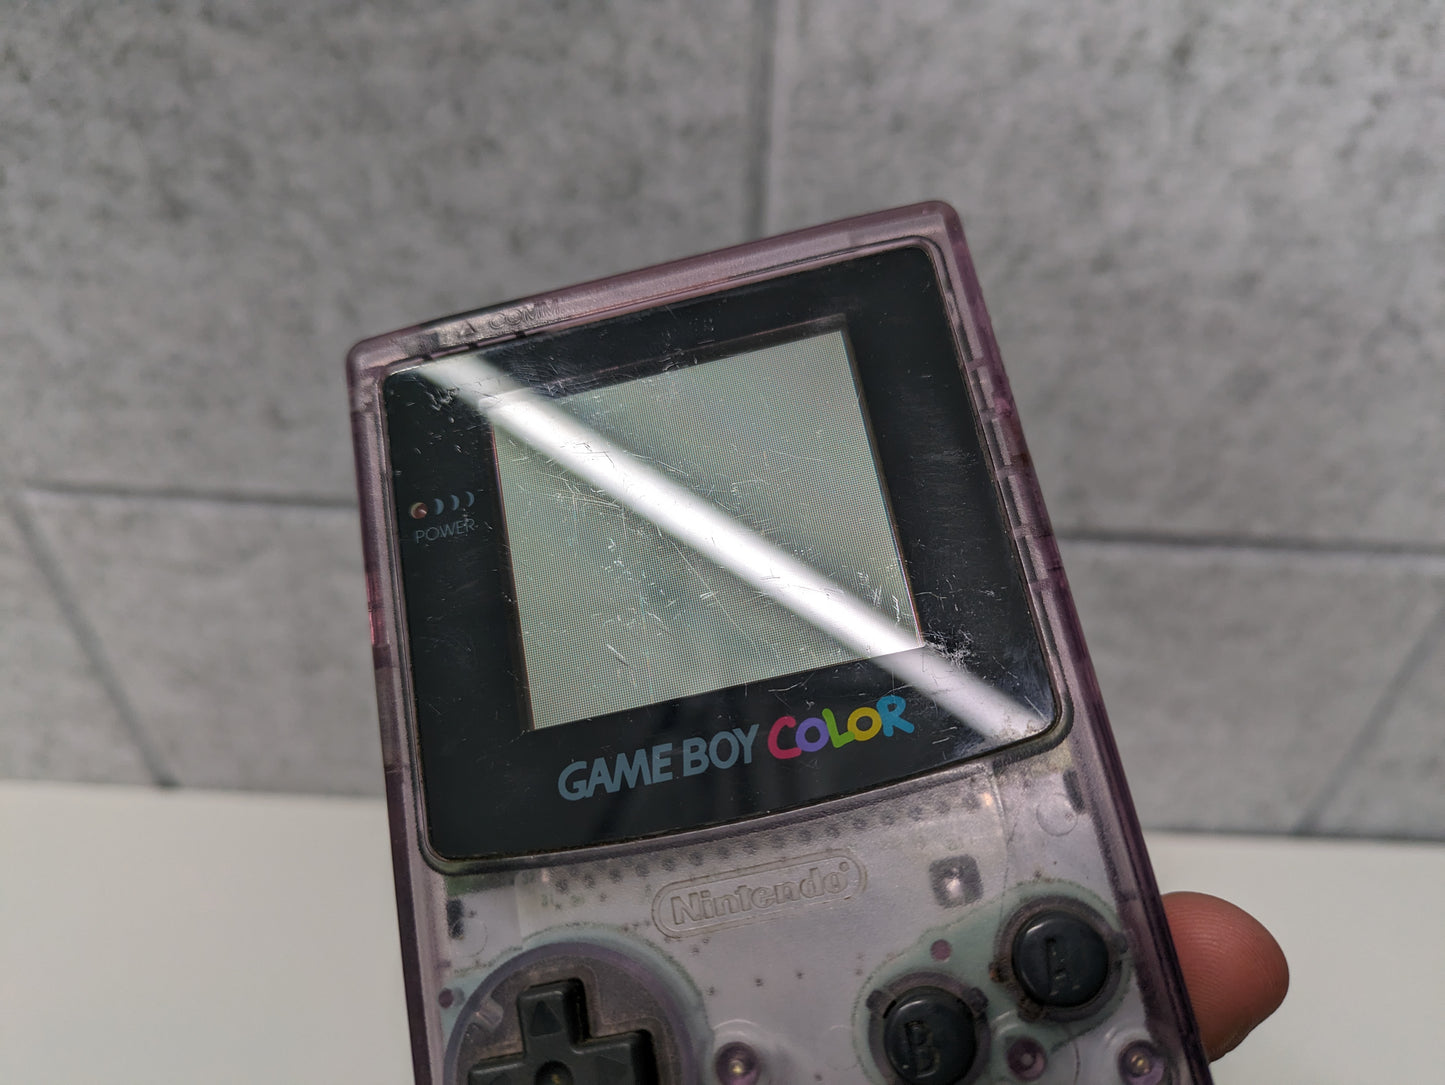 Nintendo Game Boy Color GBC Console ONLY - USED (GG62)